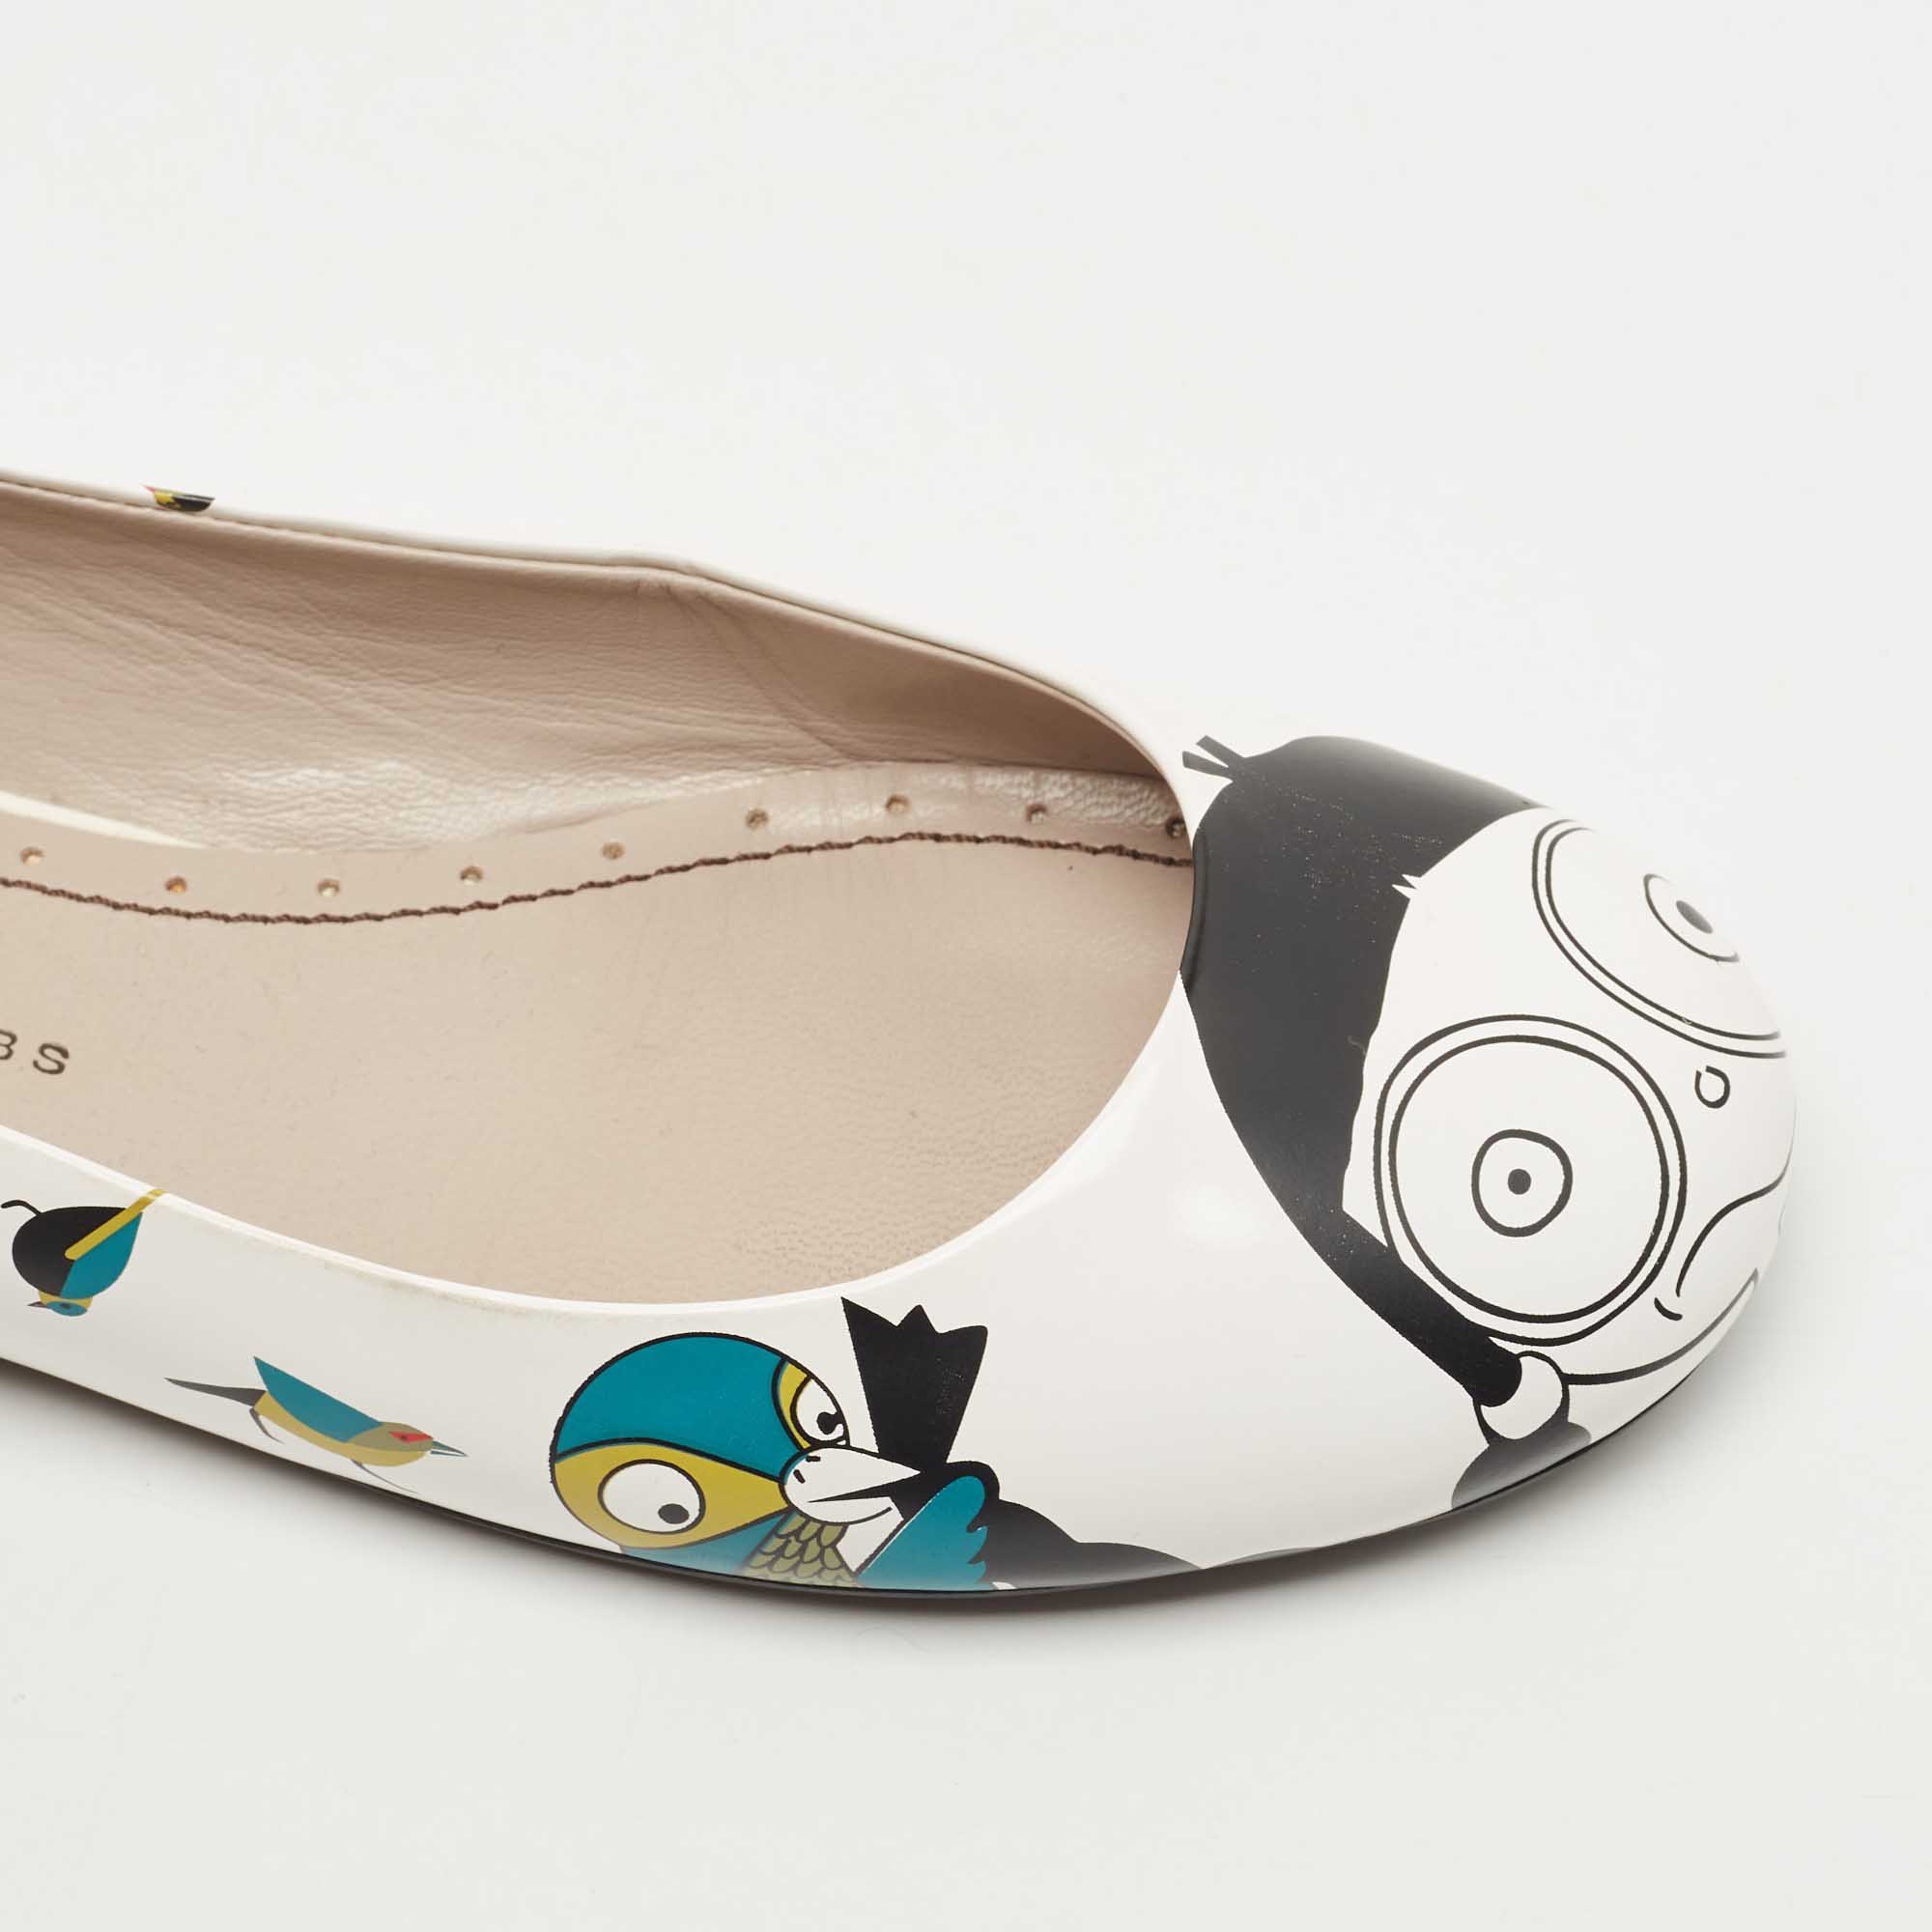 Marc By Marc Jacobs White Multicolor Bird Printed Leather Round Toe Ballet Flats Size 36